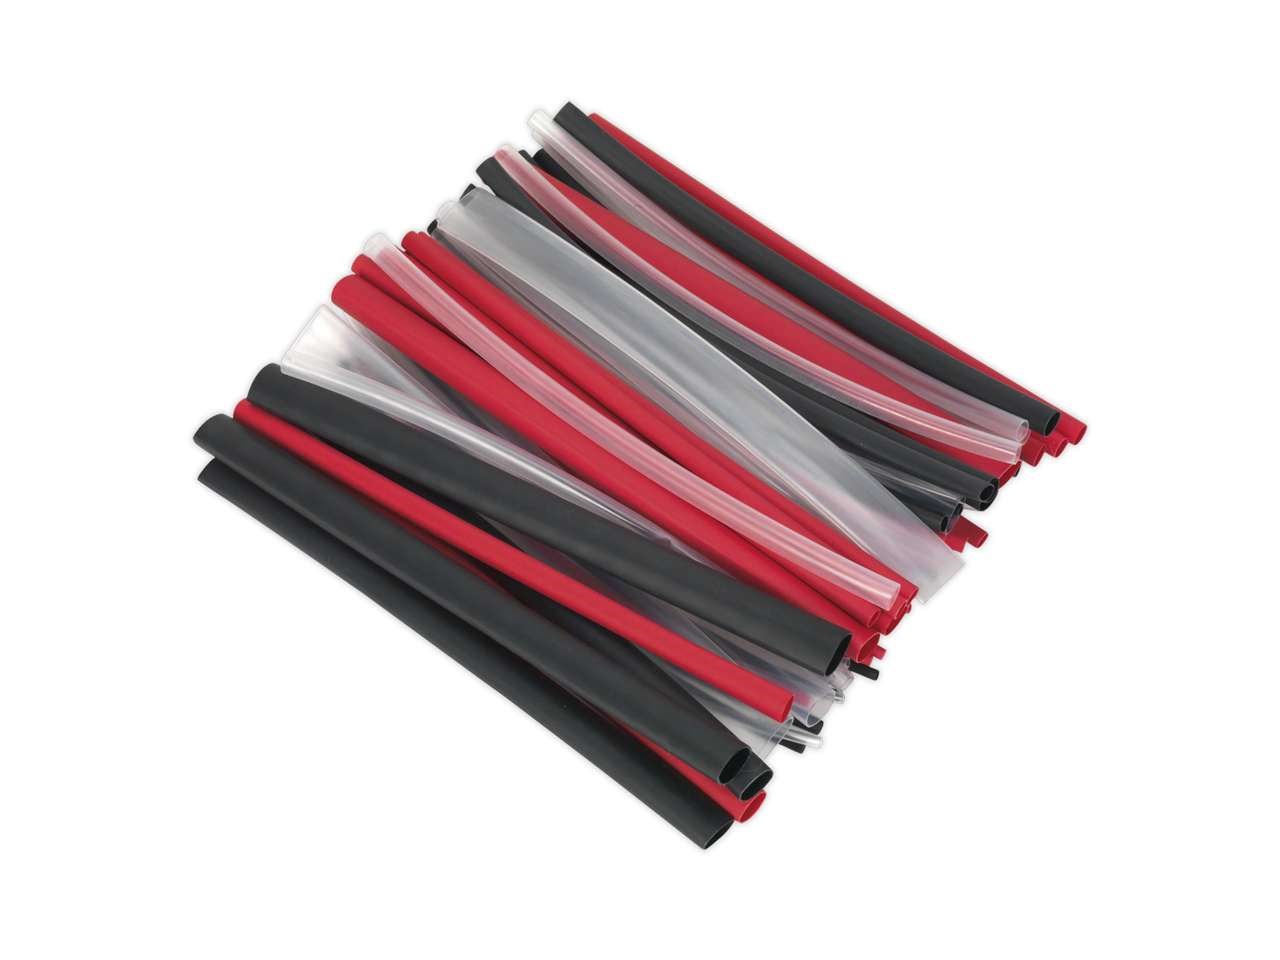 Sealey HSTAL72MC Heat Shrink Tubing Assortment 72pc Mixed Colours Heat Shrink Tubing Tractor Supply